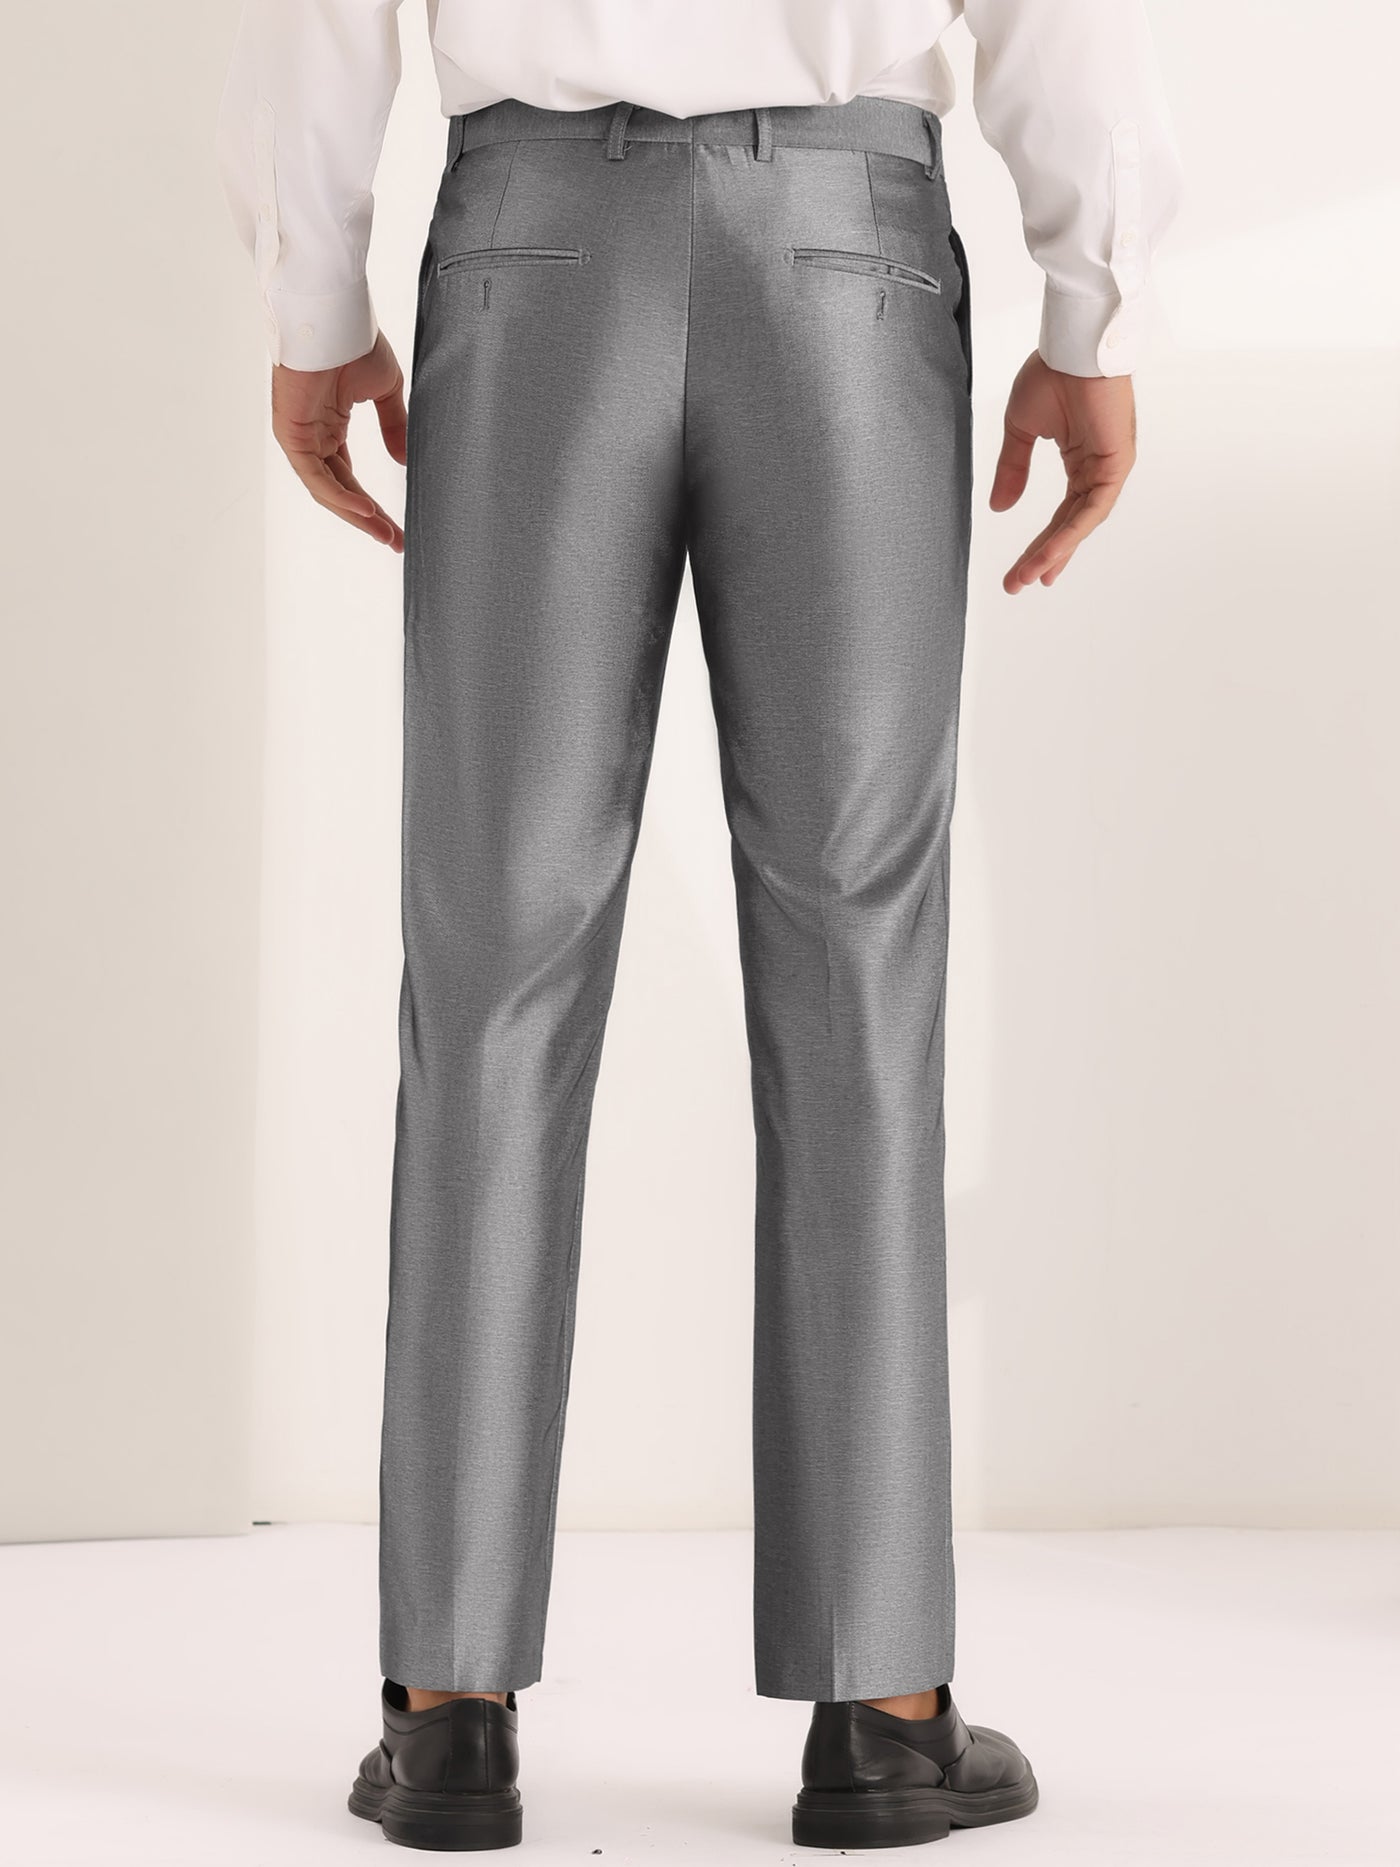 Bublédon Dress Pants for Men's Classic Fit Solid Stretch Flat Front Work Business Trousers